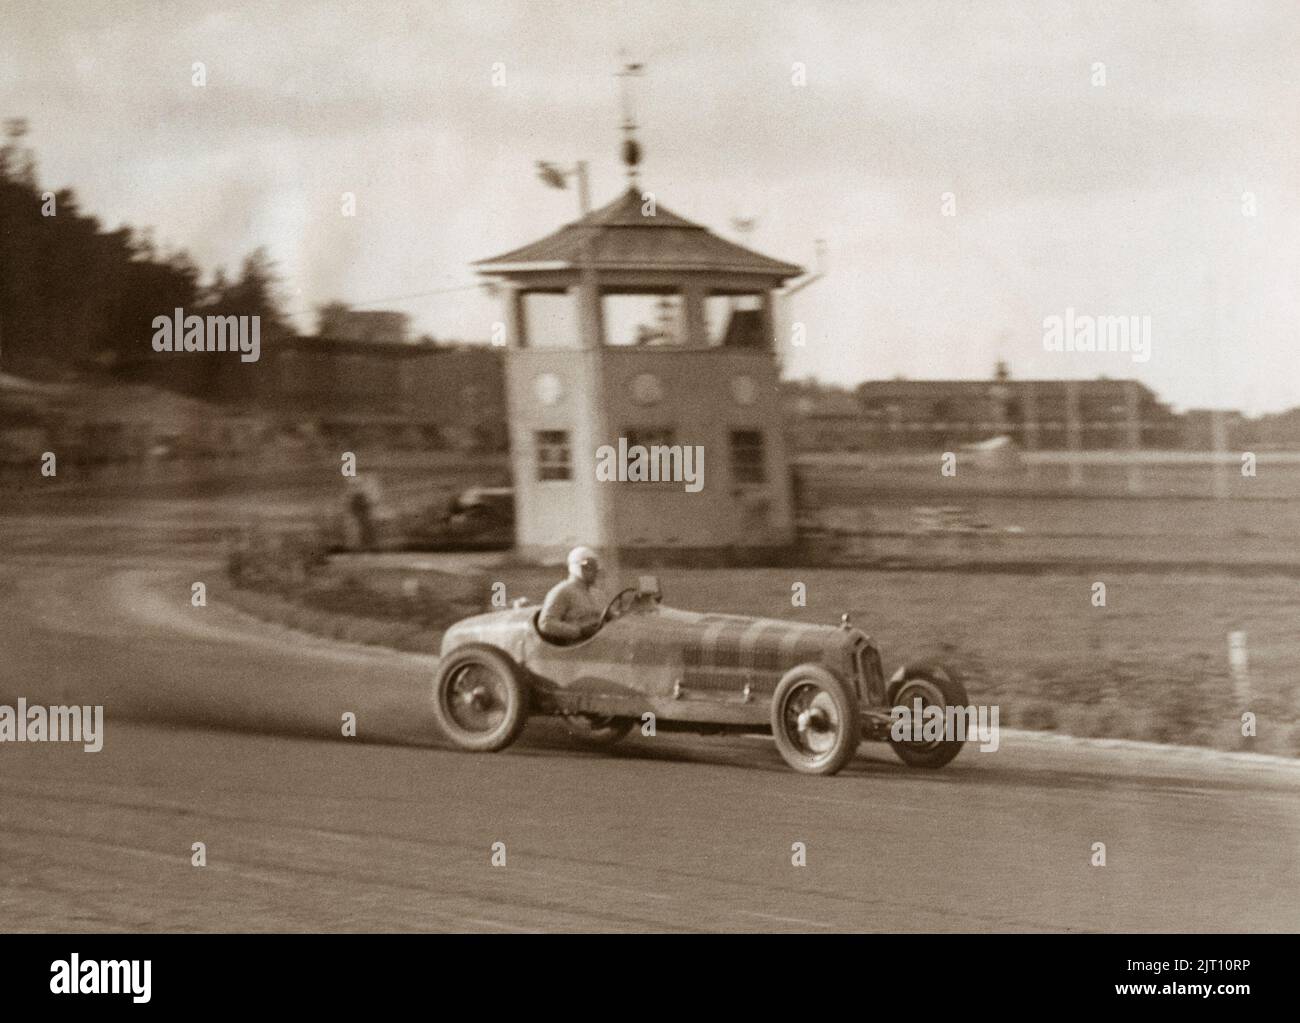 Racing car of the 1930s. The swedish racingdriver Per Victor Widengren in his Alfa Romeo Monza is seen taking the curve in full speed during the international racing event at Solvalla in Stockholm on october 15 1935. Stock Photo